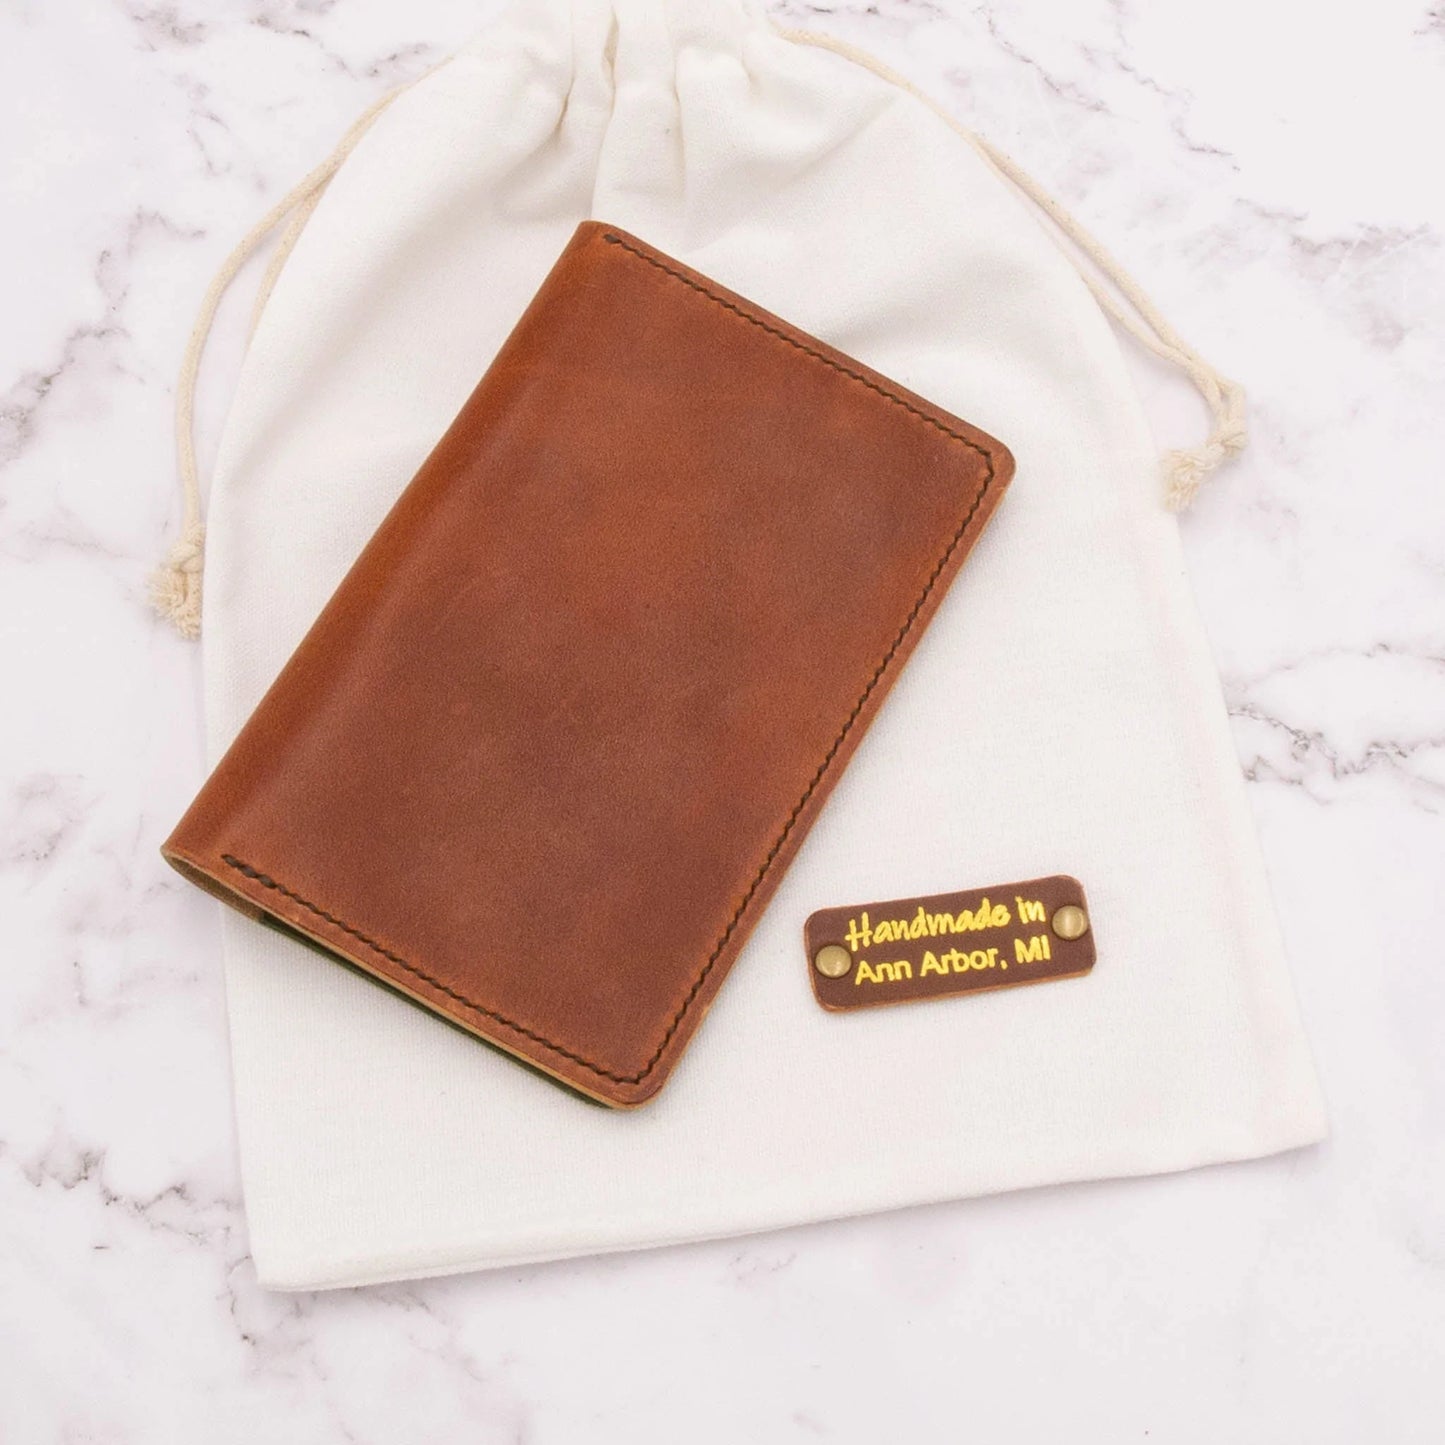 Arbor Trading Post Field Note Cover Handcrafted Leather Field Notes Cover - Two Tone Colors